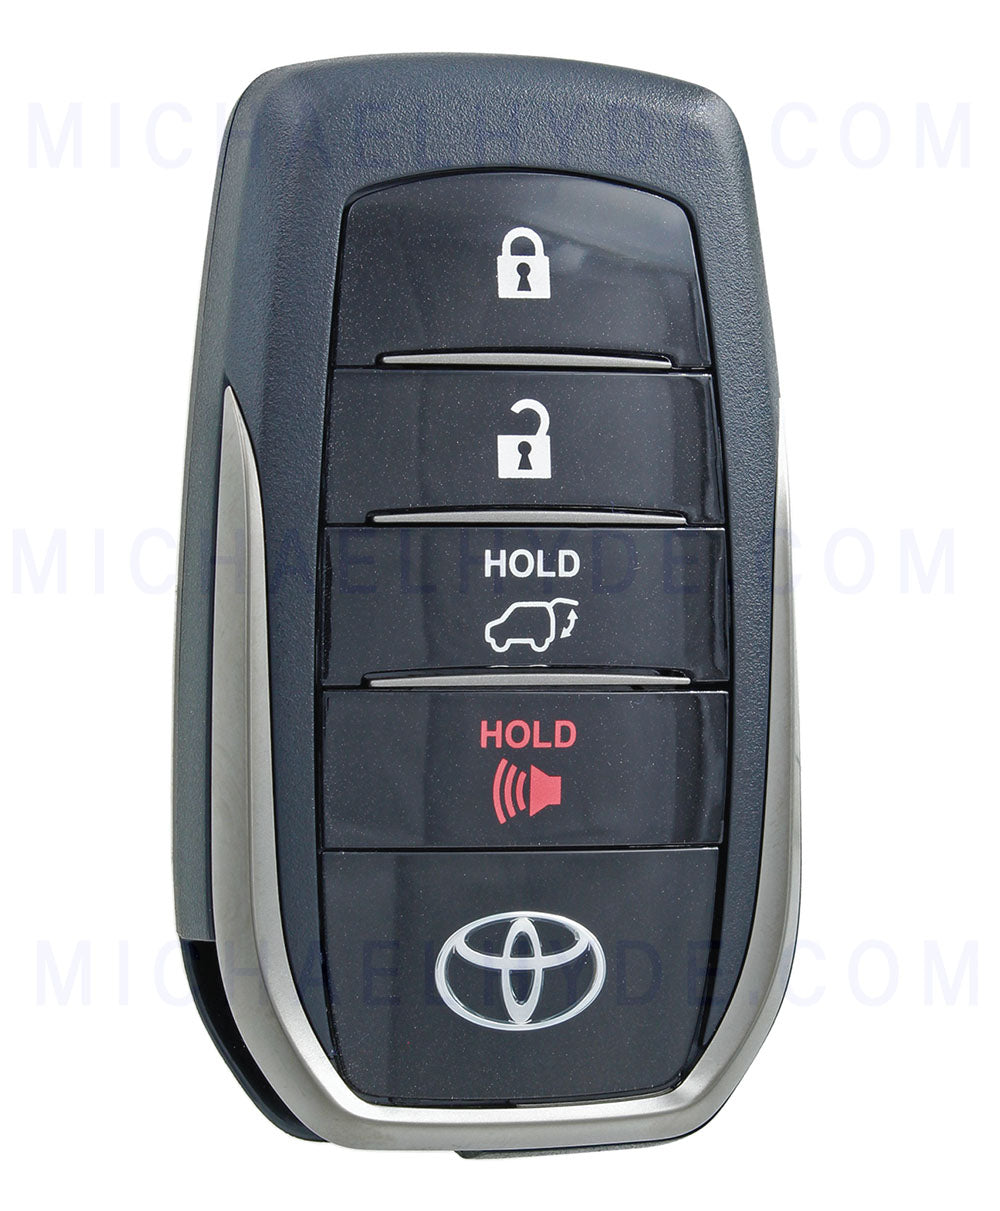 2018+ Toyota Land Cruiser Proximity Remote Fob (with PWR Rear Door) 8990H-60M80 - FCC: HYQ14FBA - Toyota Factory Original